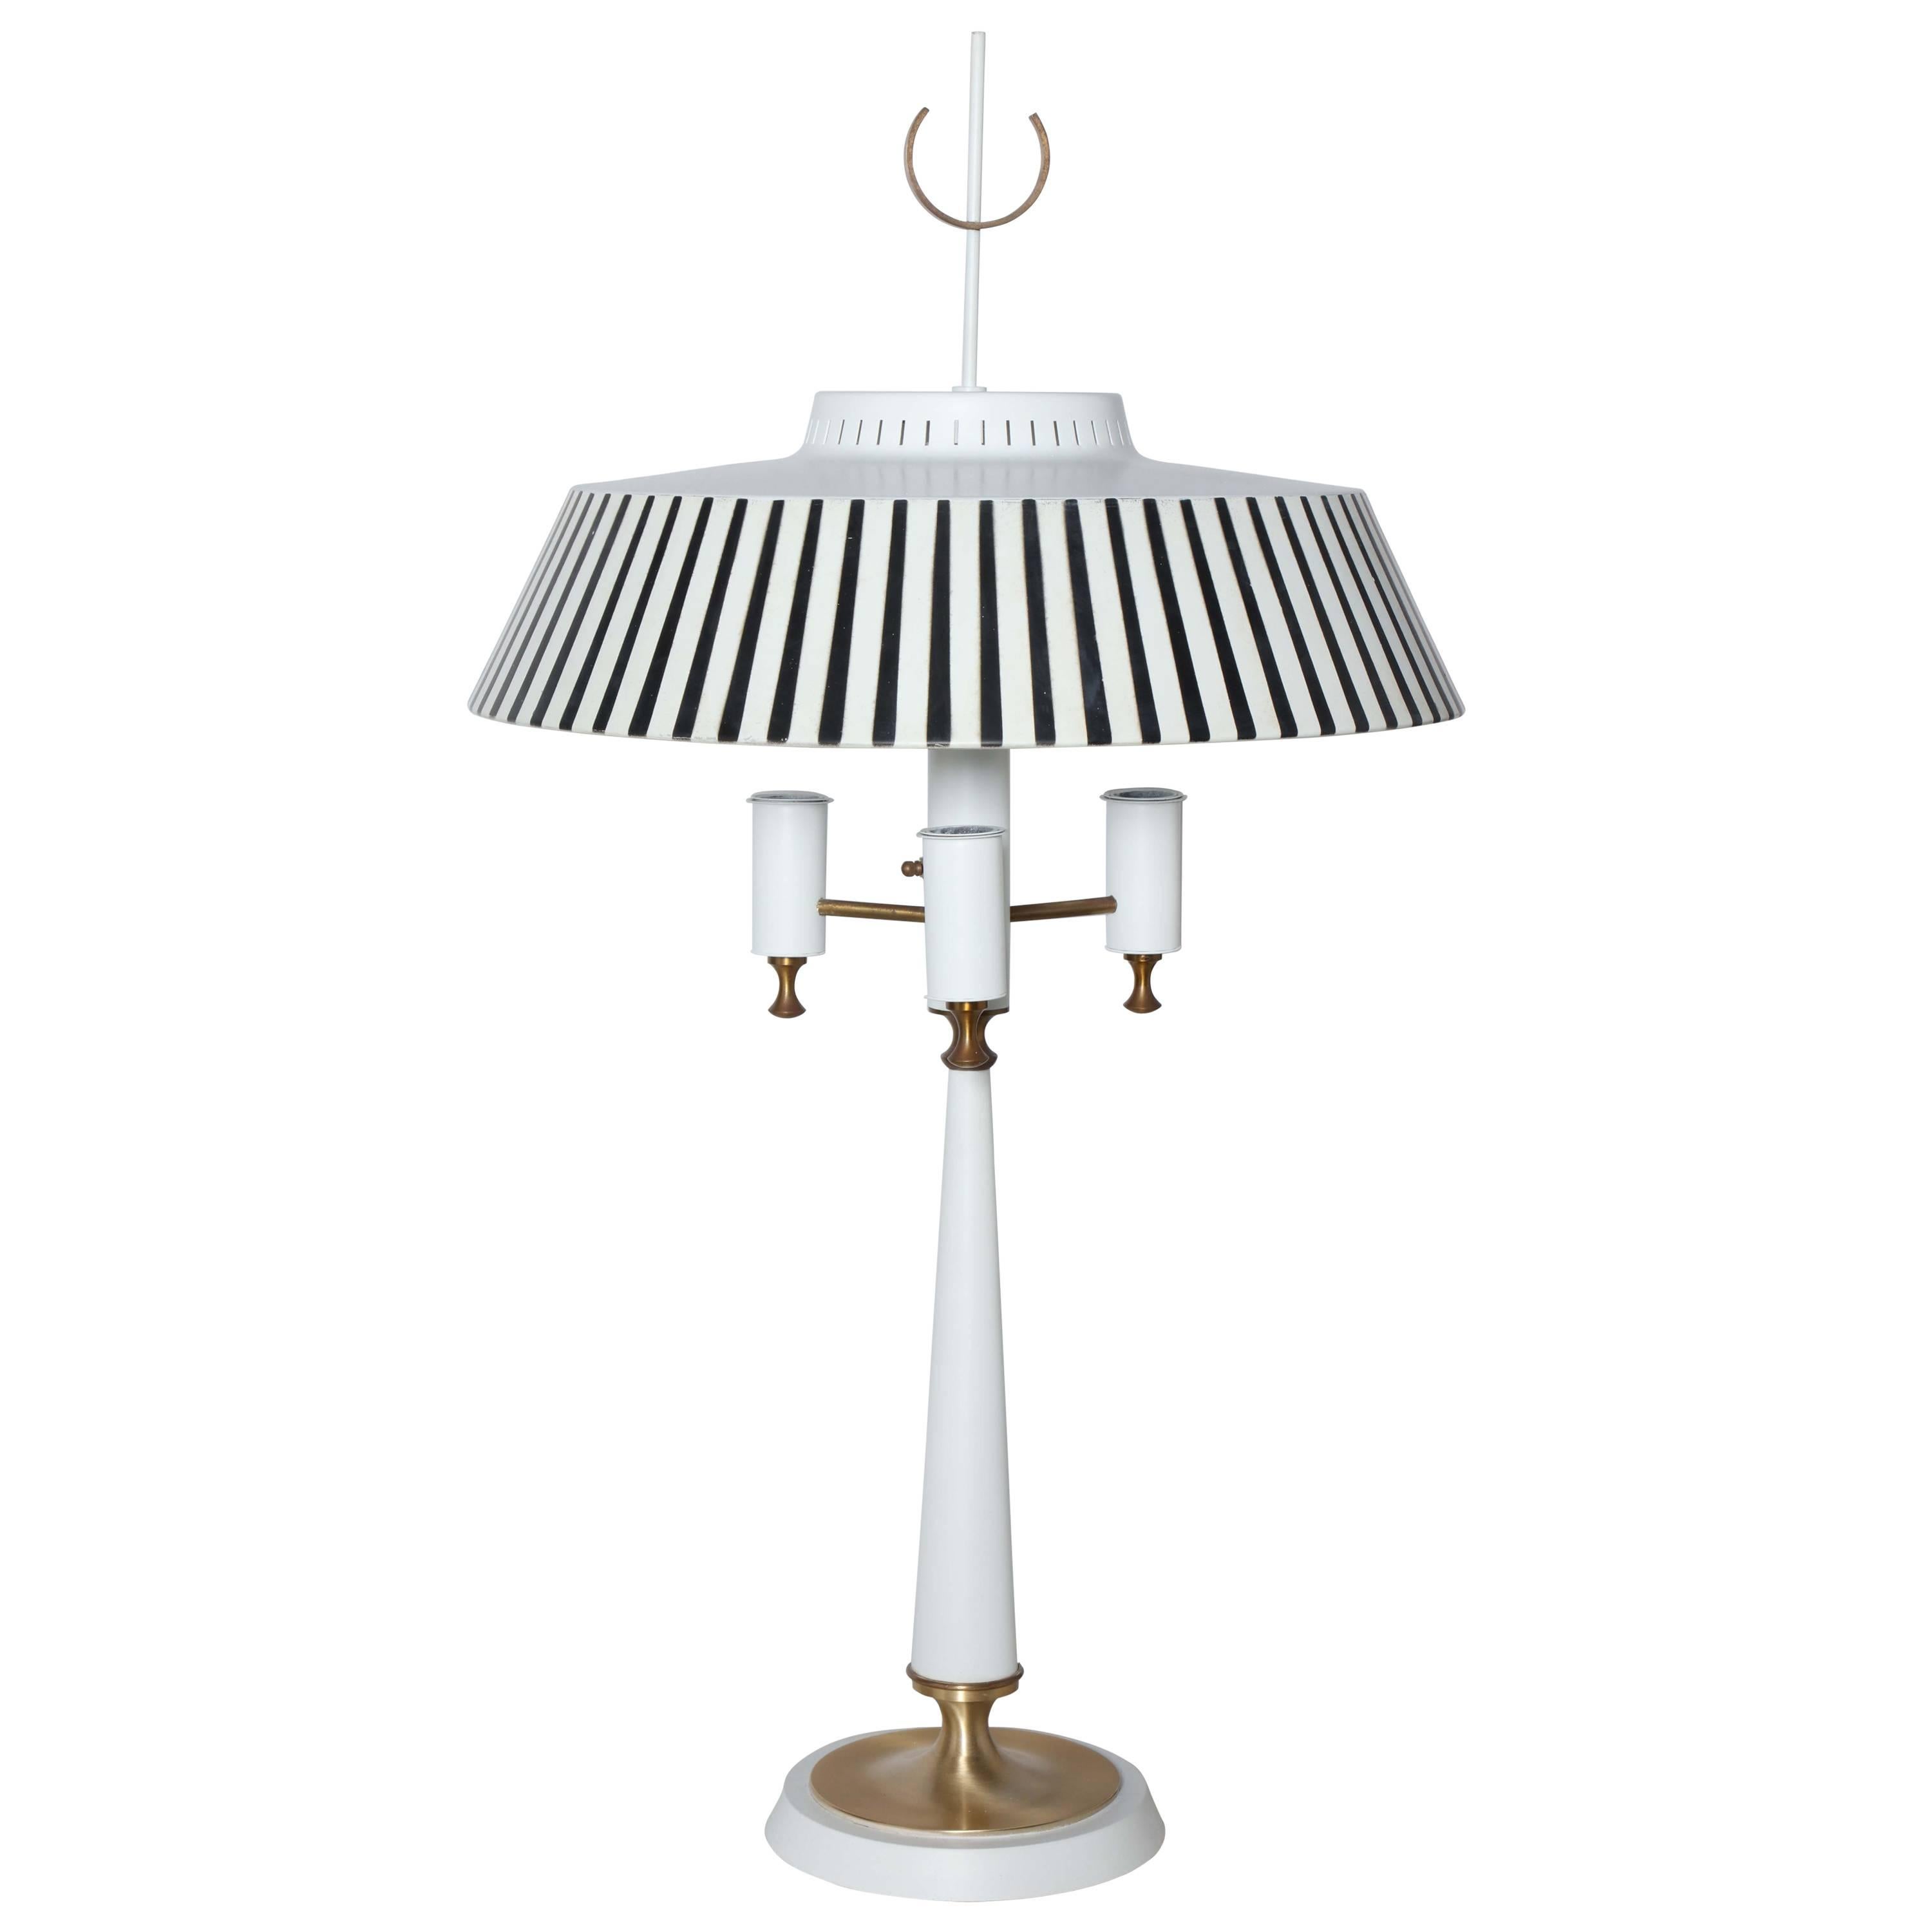 Gerald Thurston White Candlestick Lamp with Black & White Stripe Metal Shade For Sale